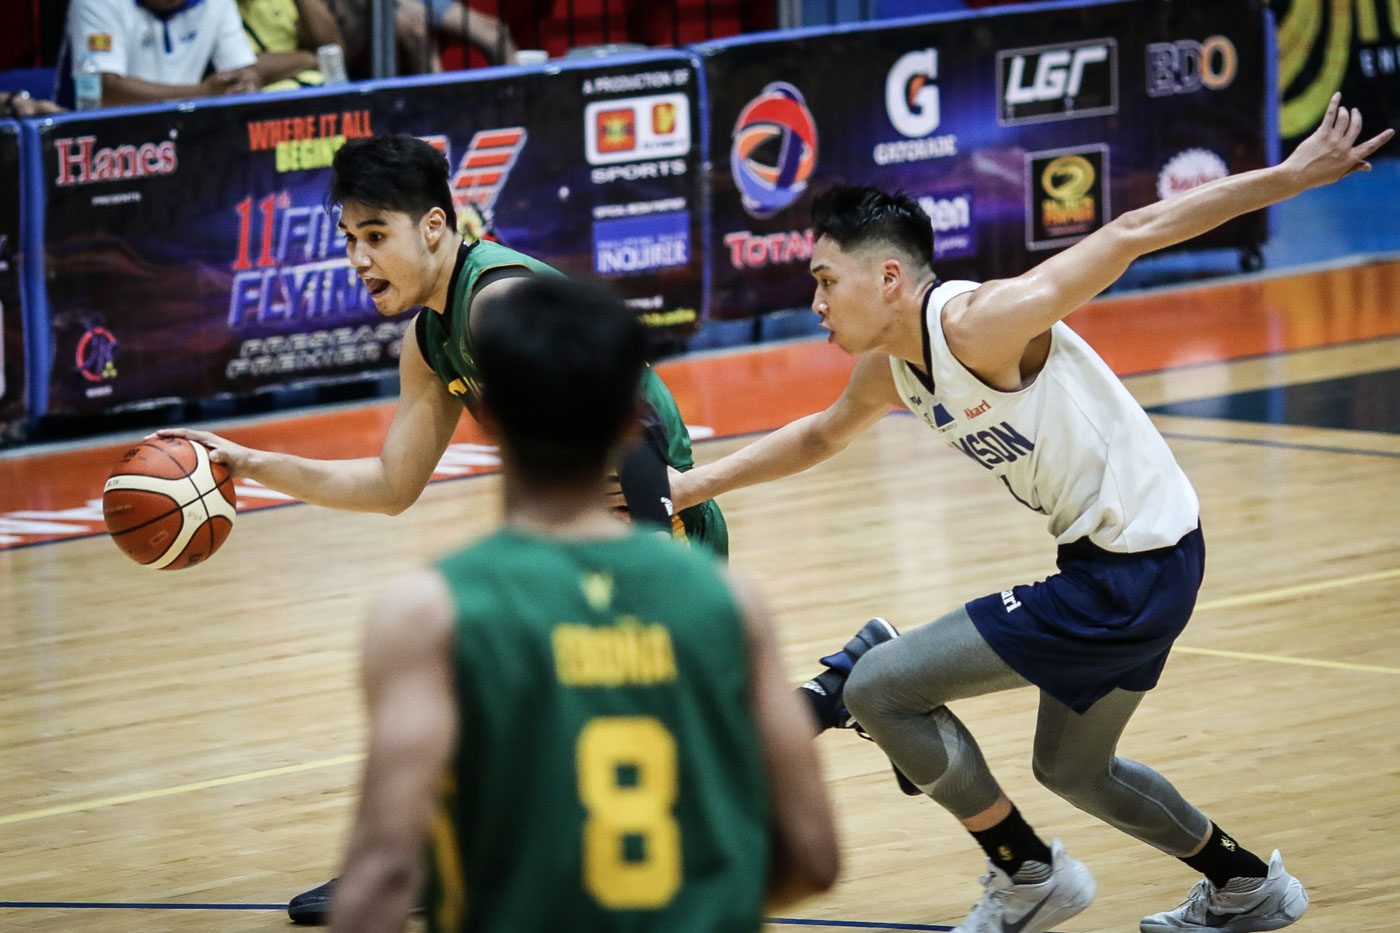 Arvin Tolentino’s story: Beating the odds through sports